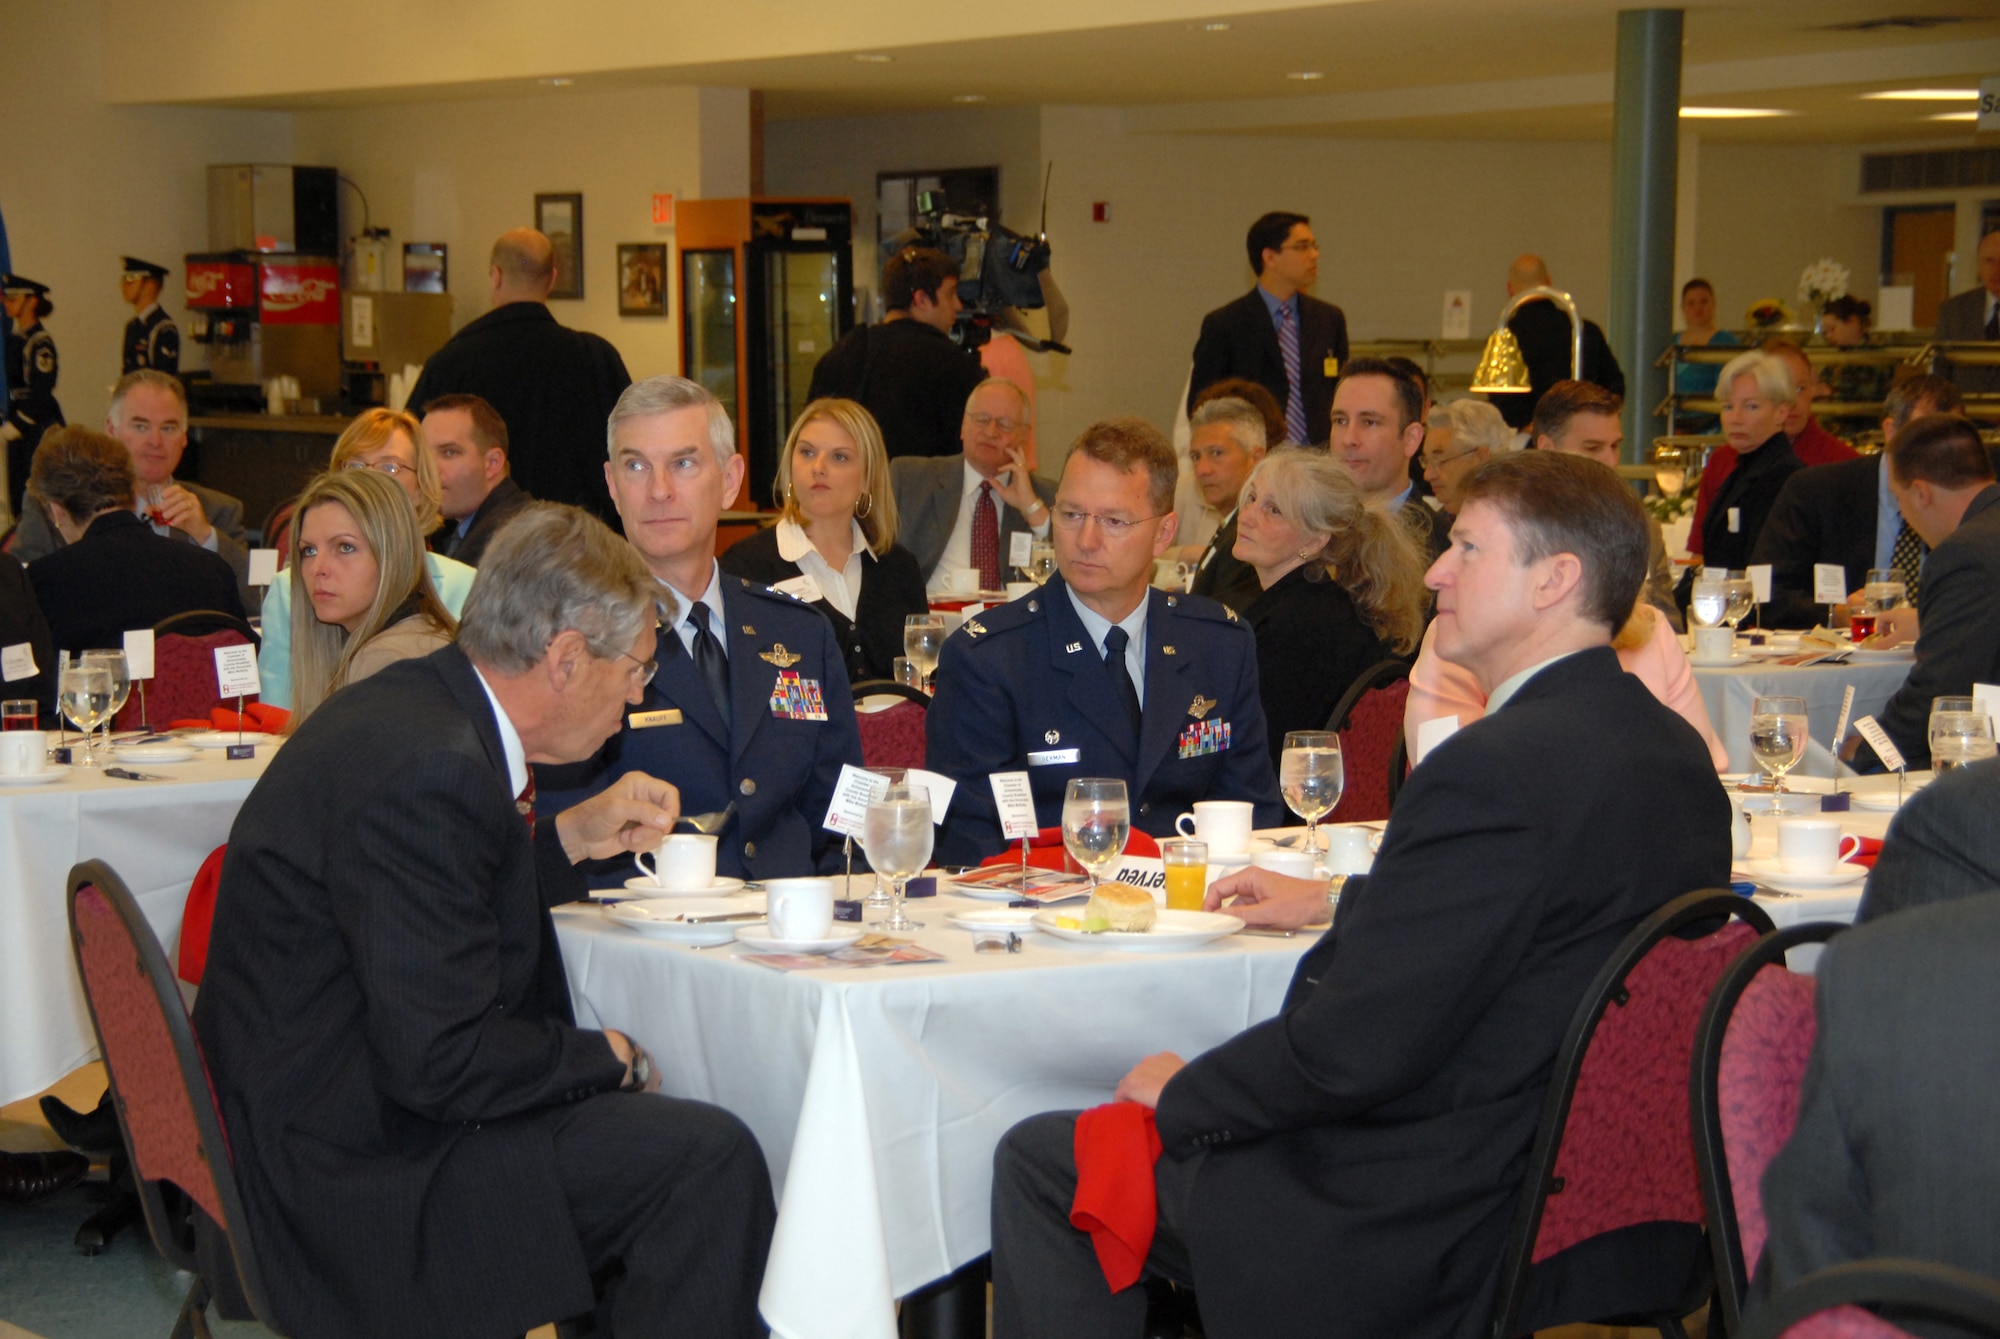 From left, Roger Hannay, SMAC chairman; Maj. Gen. Robert Knauff, NYANG commander; Col. Anthony German, 109th AW commander; and Rep. Michael McNulty attended a breakfast here honoring McNulty.